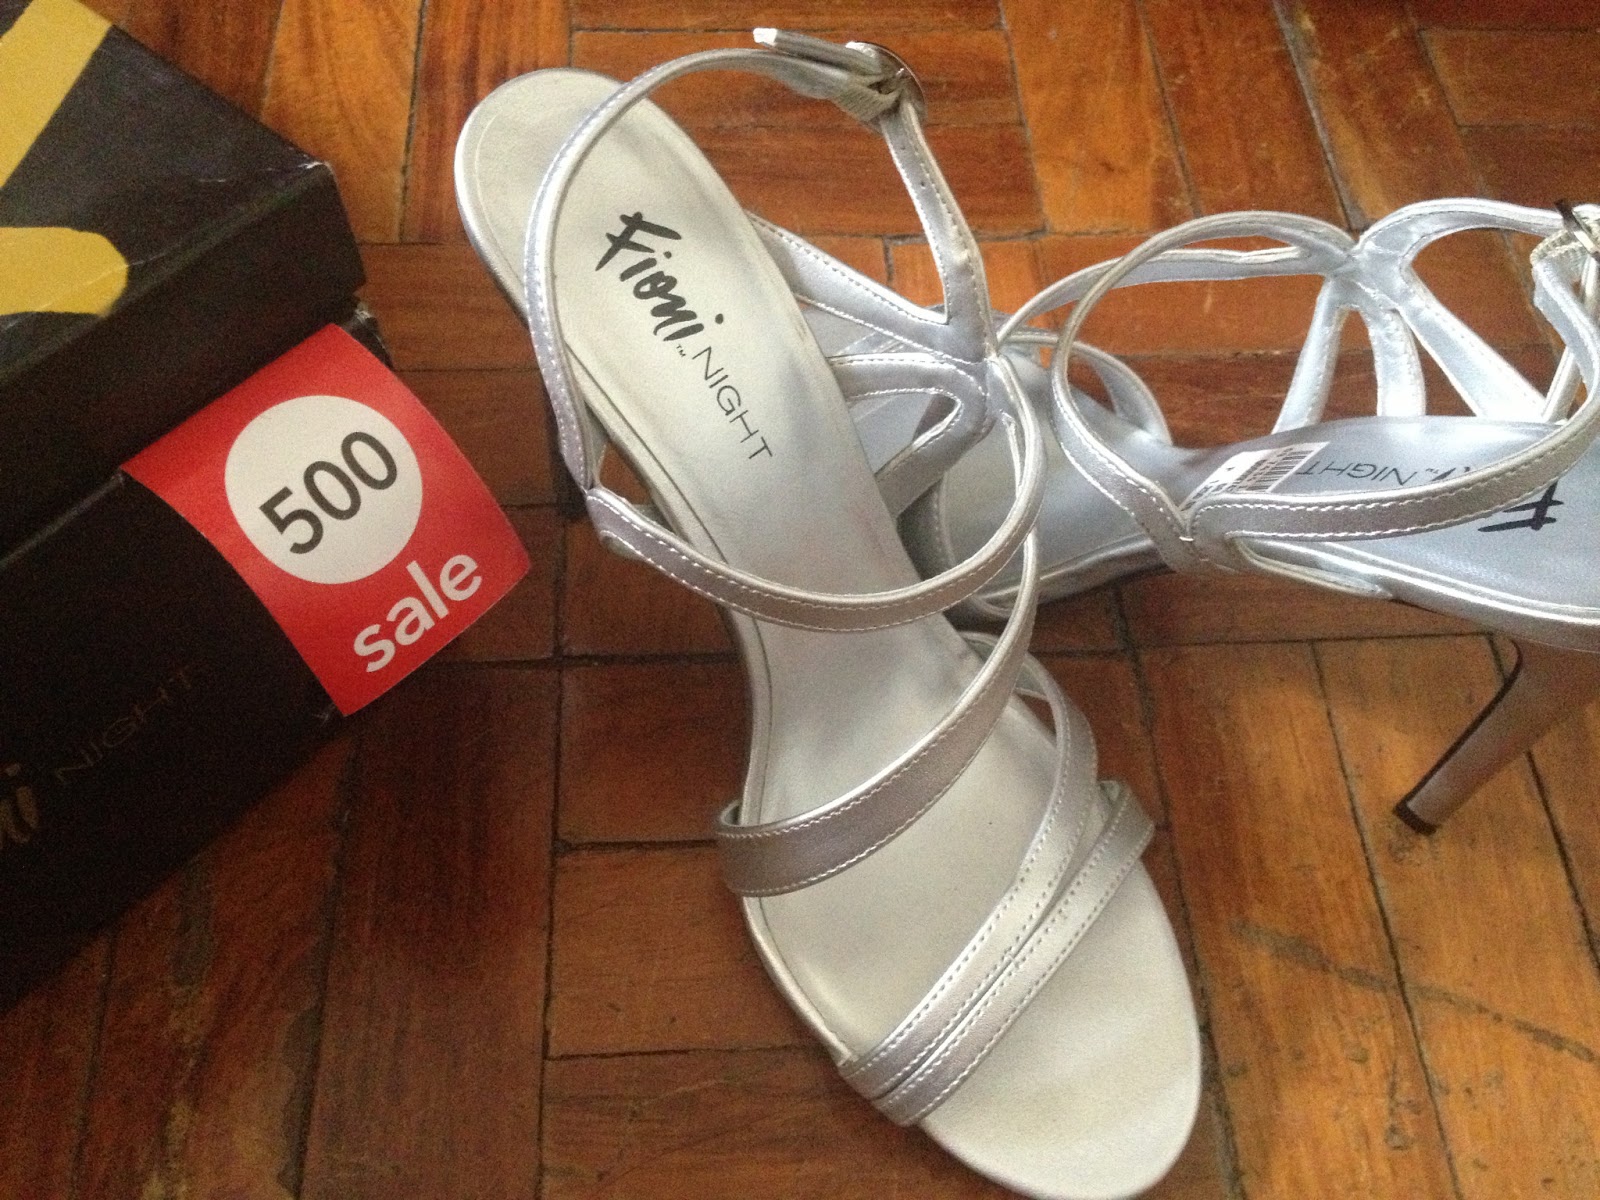 There are still other shoes that are on sale in Payless, so you might ...